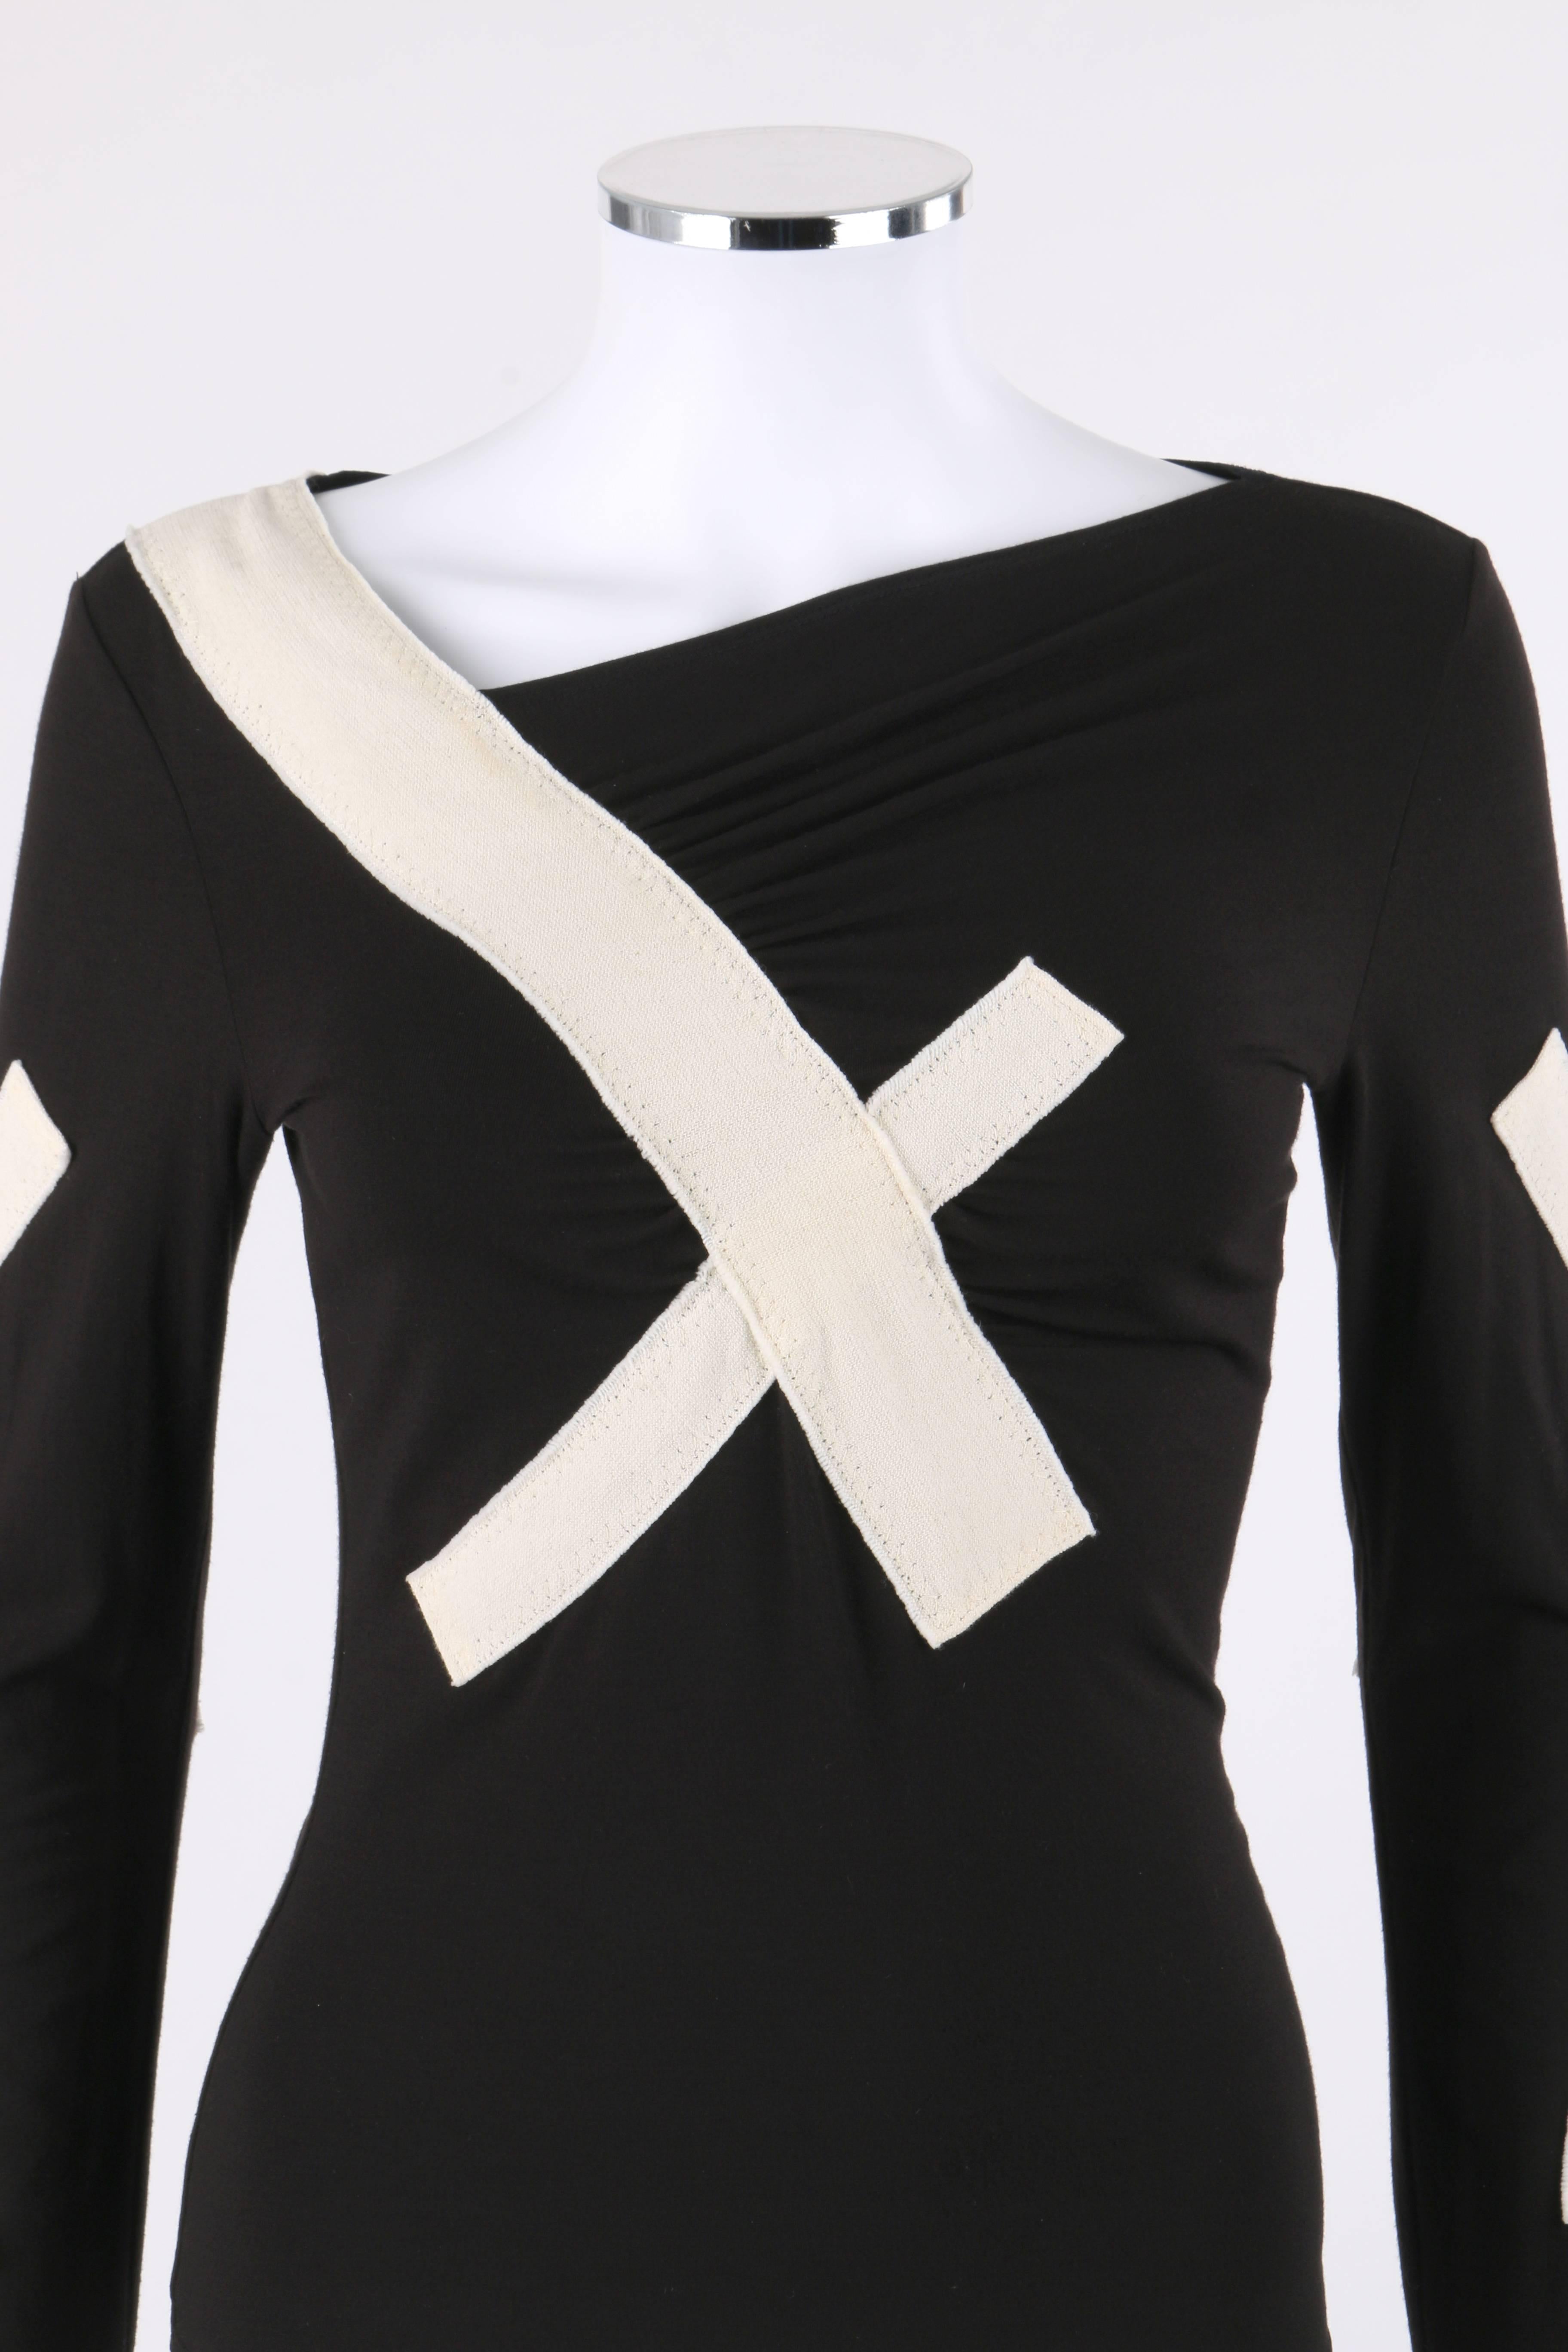 Issey Miyake Spring/Summer 2004 black jersey knit & winter white bandage sweater / top. Designed by Naoki Takizawa. Runway look #11. Asymmetrical bateau neckline. Winter white bandage cross detail wrapping from shoulder to center at front and back